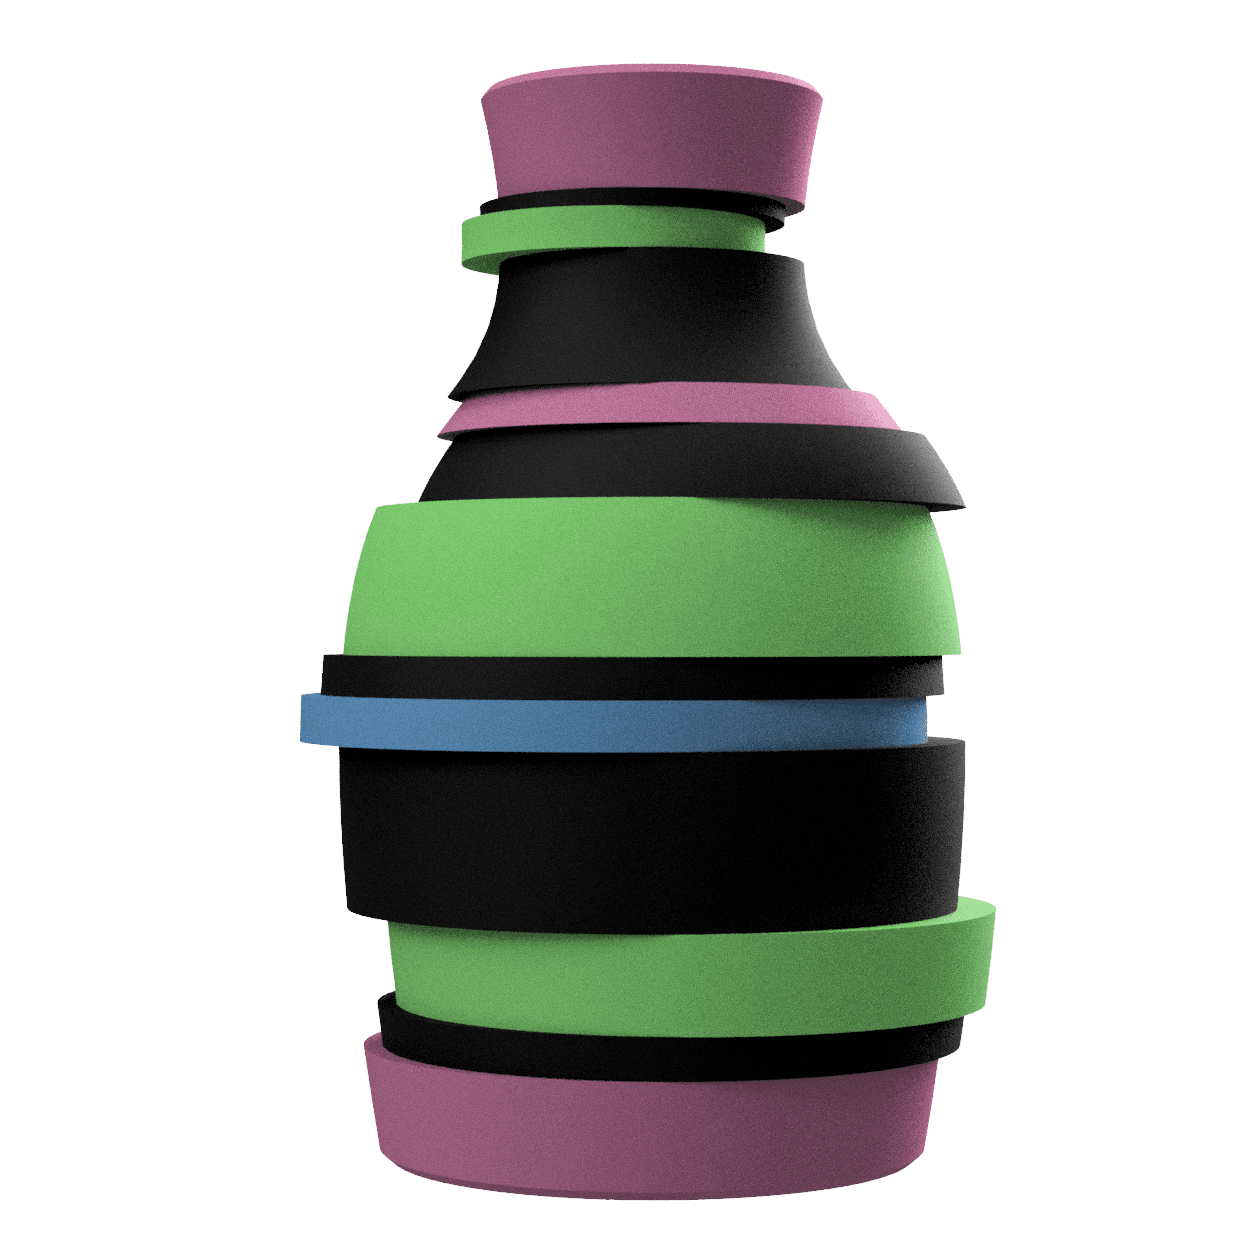 3D Printable Vase with Glitch Aesthetic Design for Home Decor 3d model